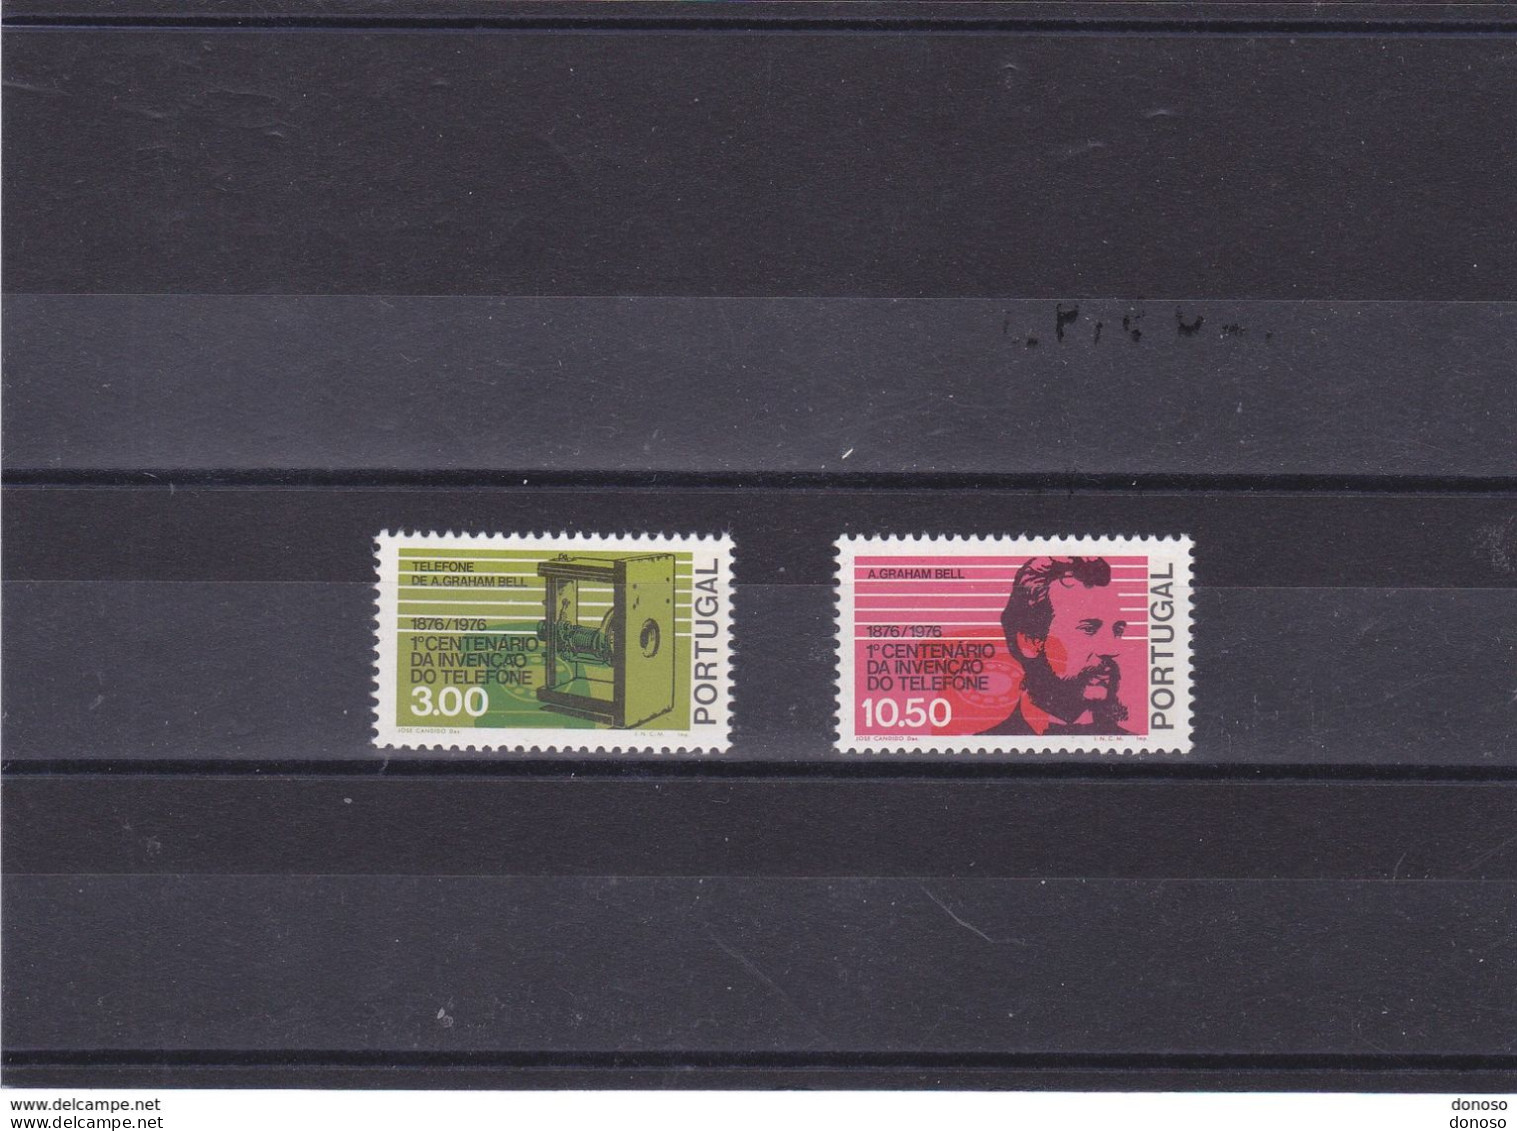 PORTUGAL 1976 TELEPHONE, Graham Bell Yvert 1287-1288, Michel 1307-1308 NEUF** MNH Cote 5 Euros - Unused Stamps